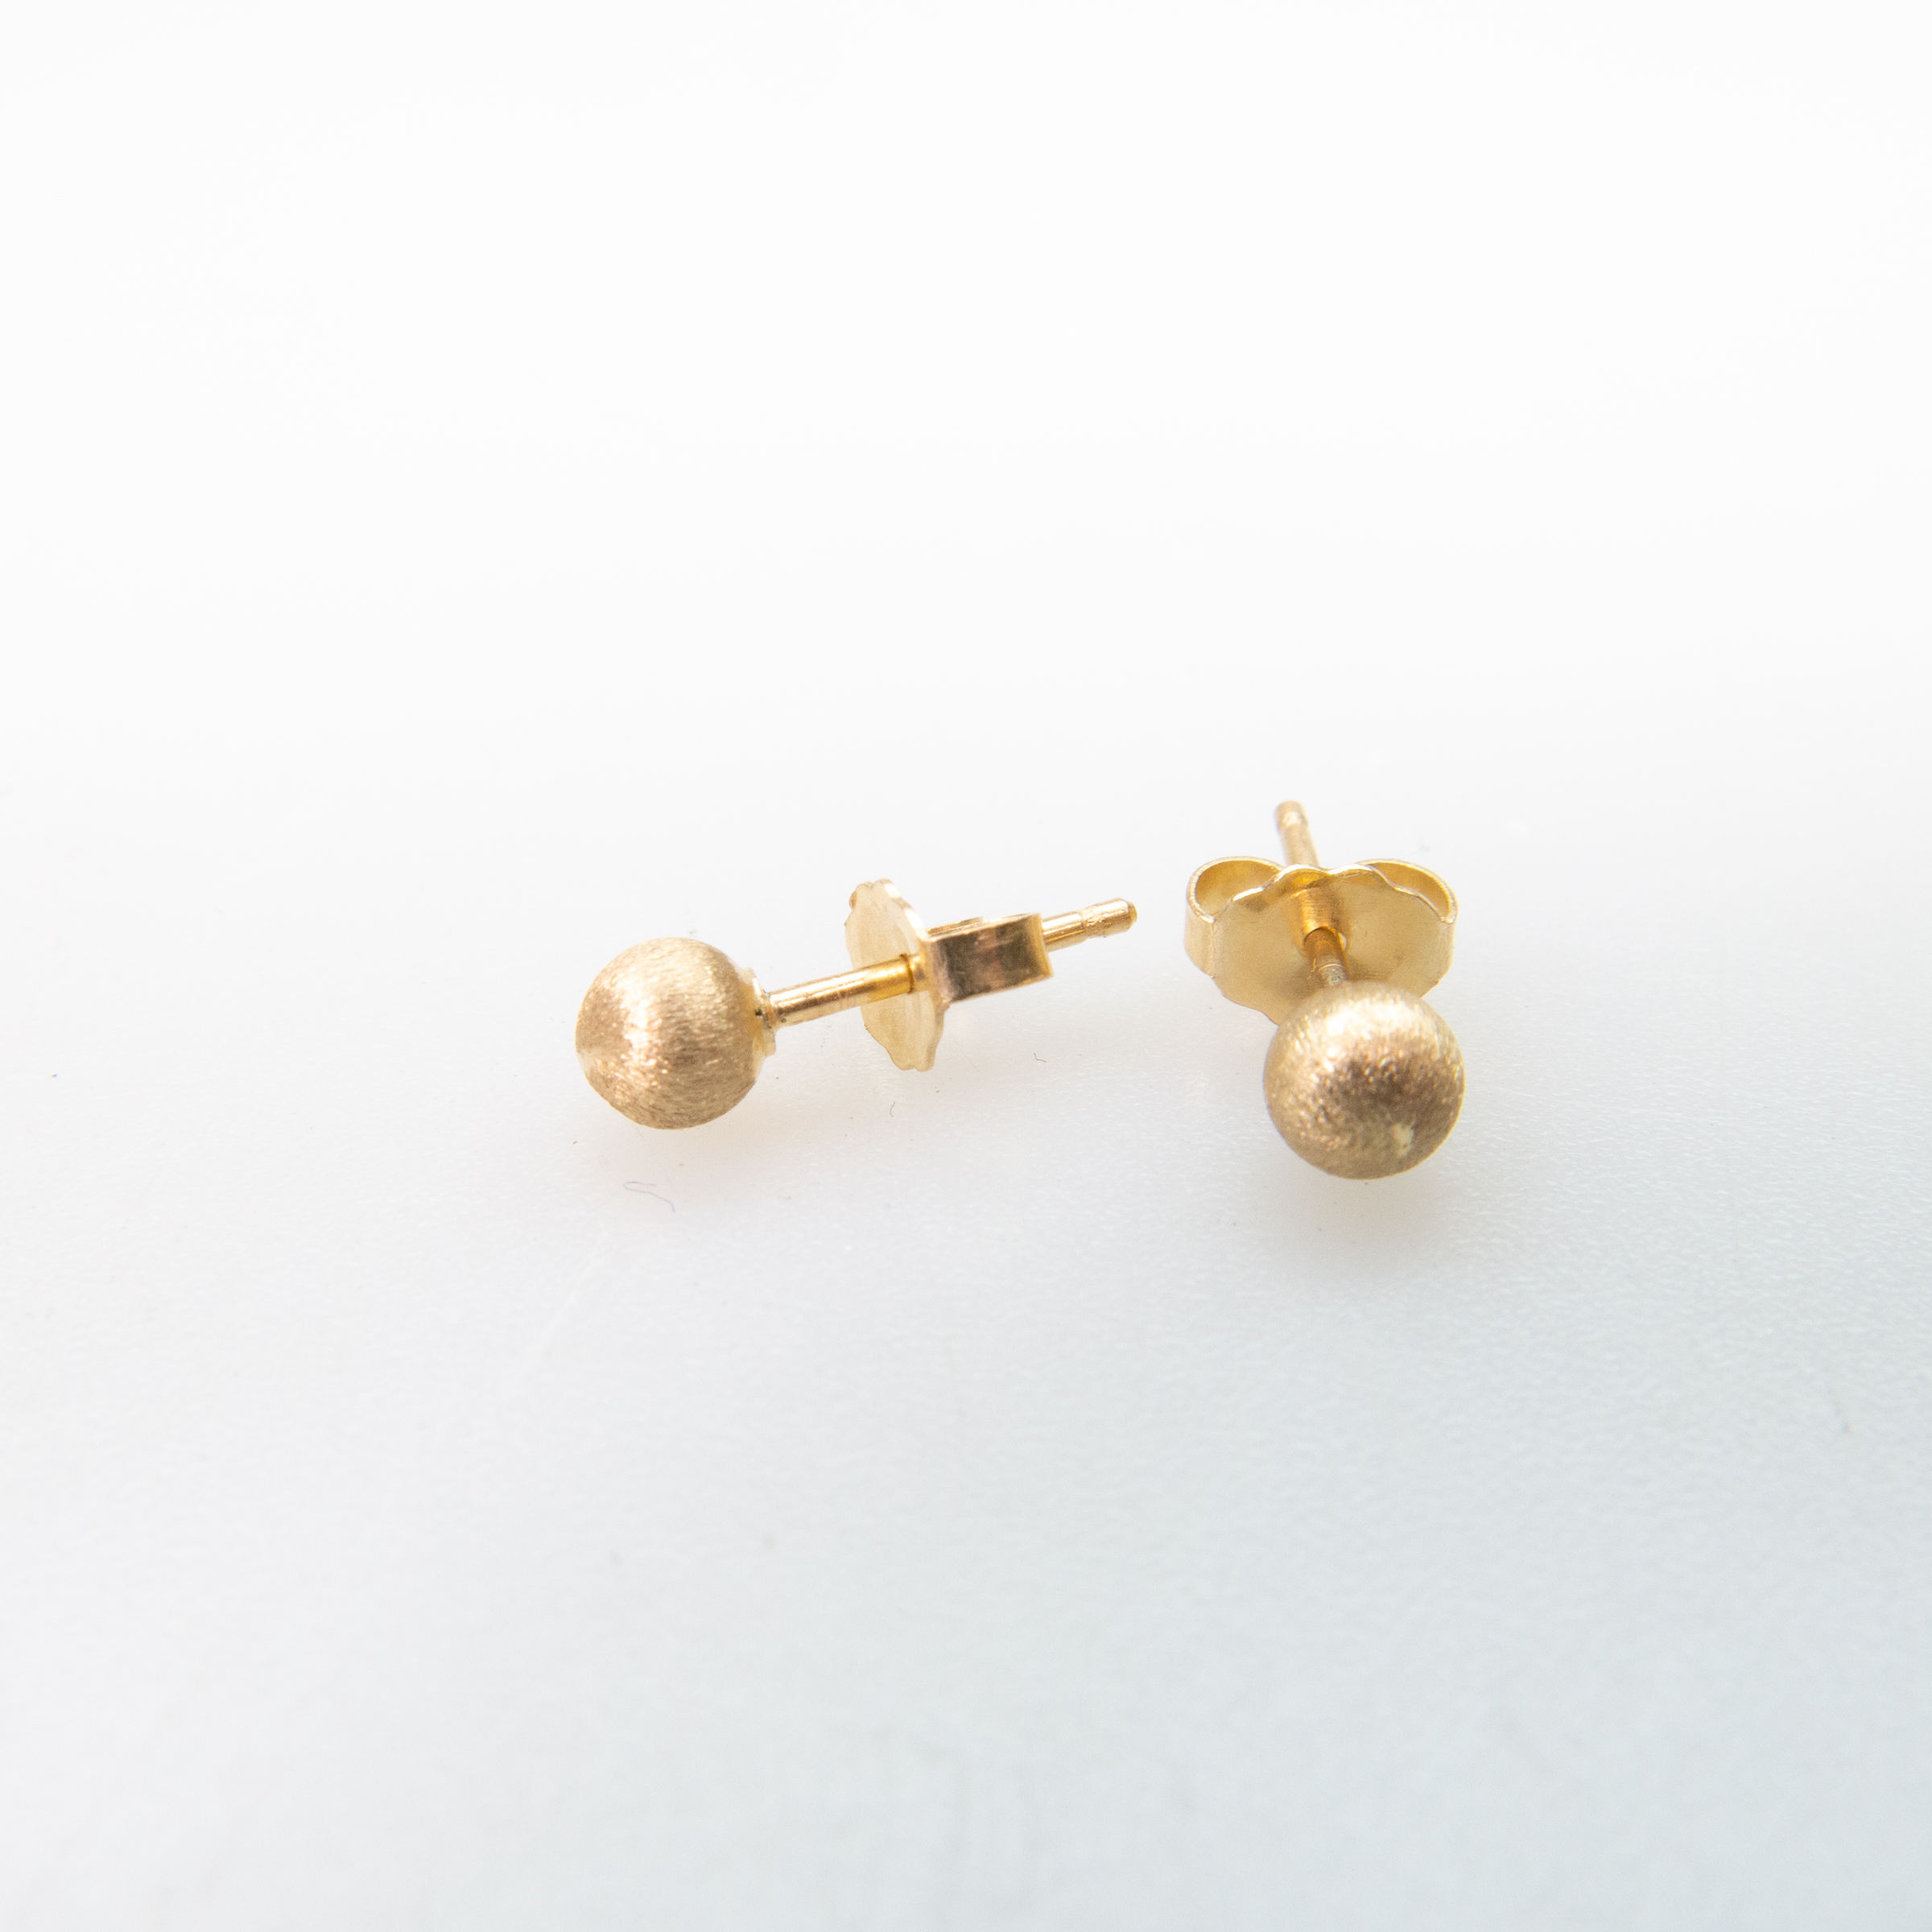 31 x Pairs Of 14k Yellow Gold Stud Earrings